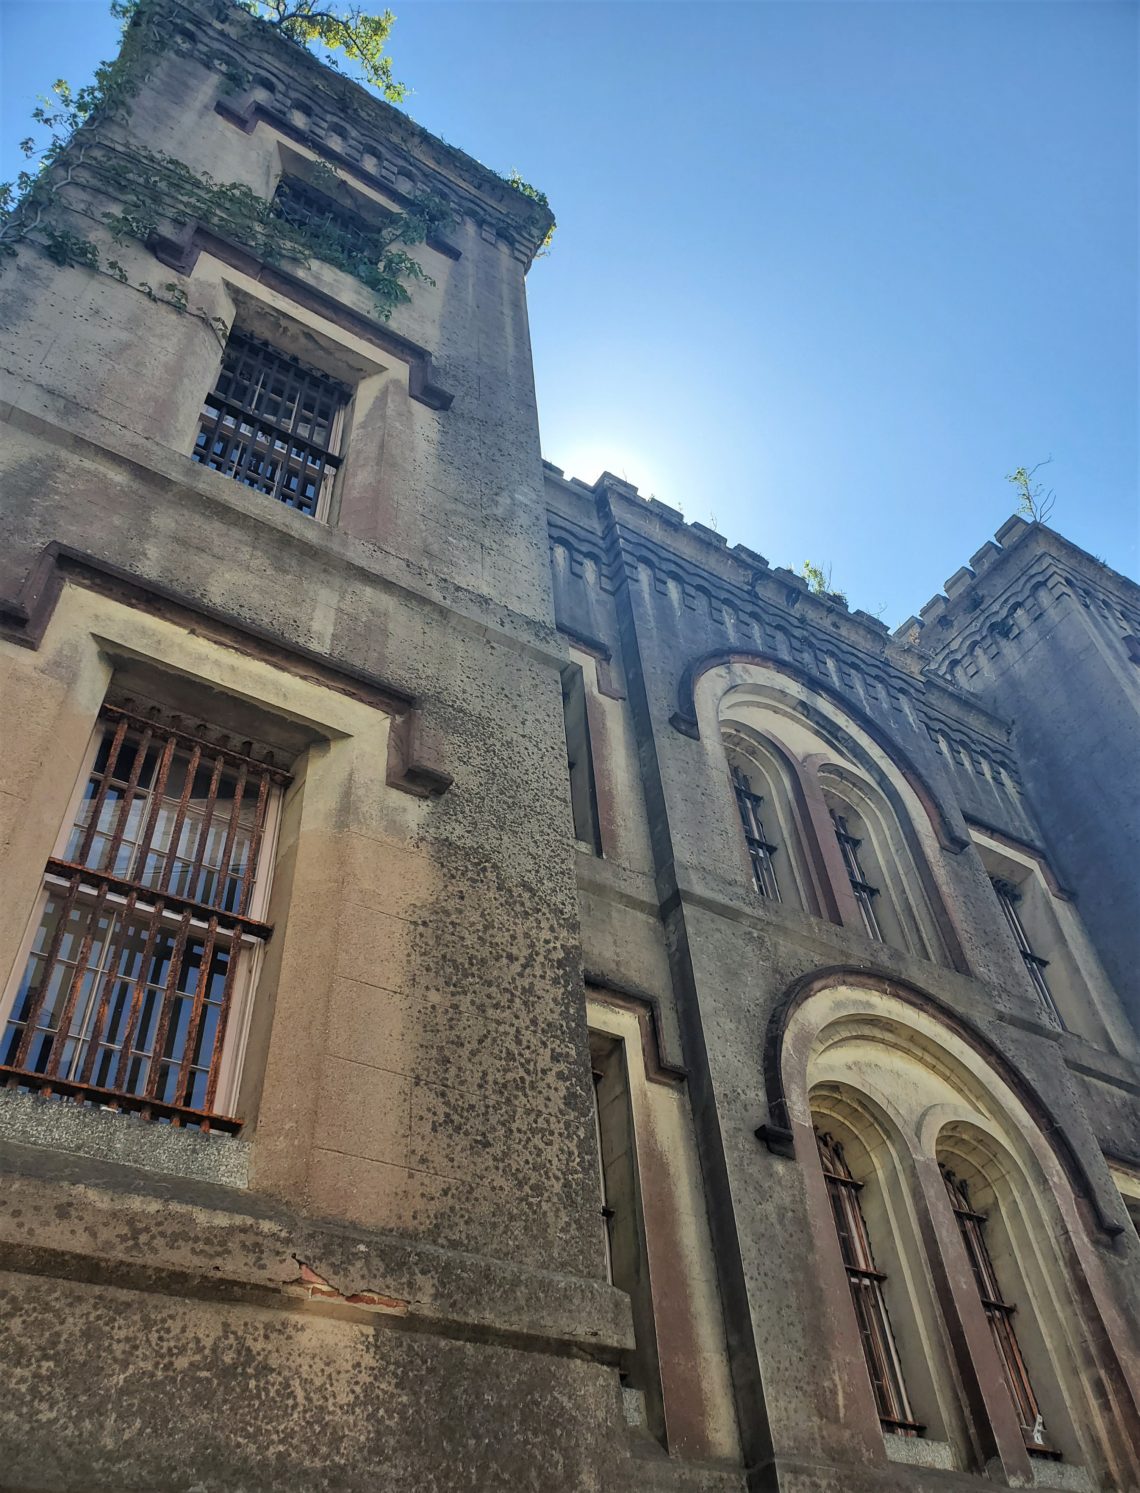 Built in 1802, the Old City Jail is one of the most haunted buildings in Charleston. In addition to serving as a jail and current ghost home, it has served other purposes. For example, during the Civil War the famed 54th Massachusetts Regiment (which was the focus of the movie Glory) was quartered there. 